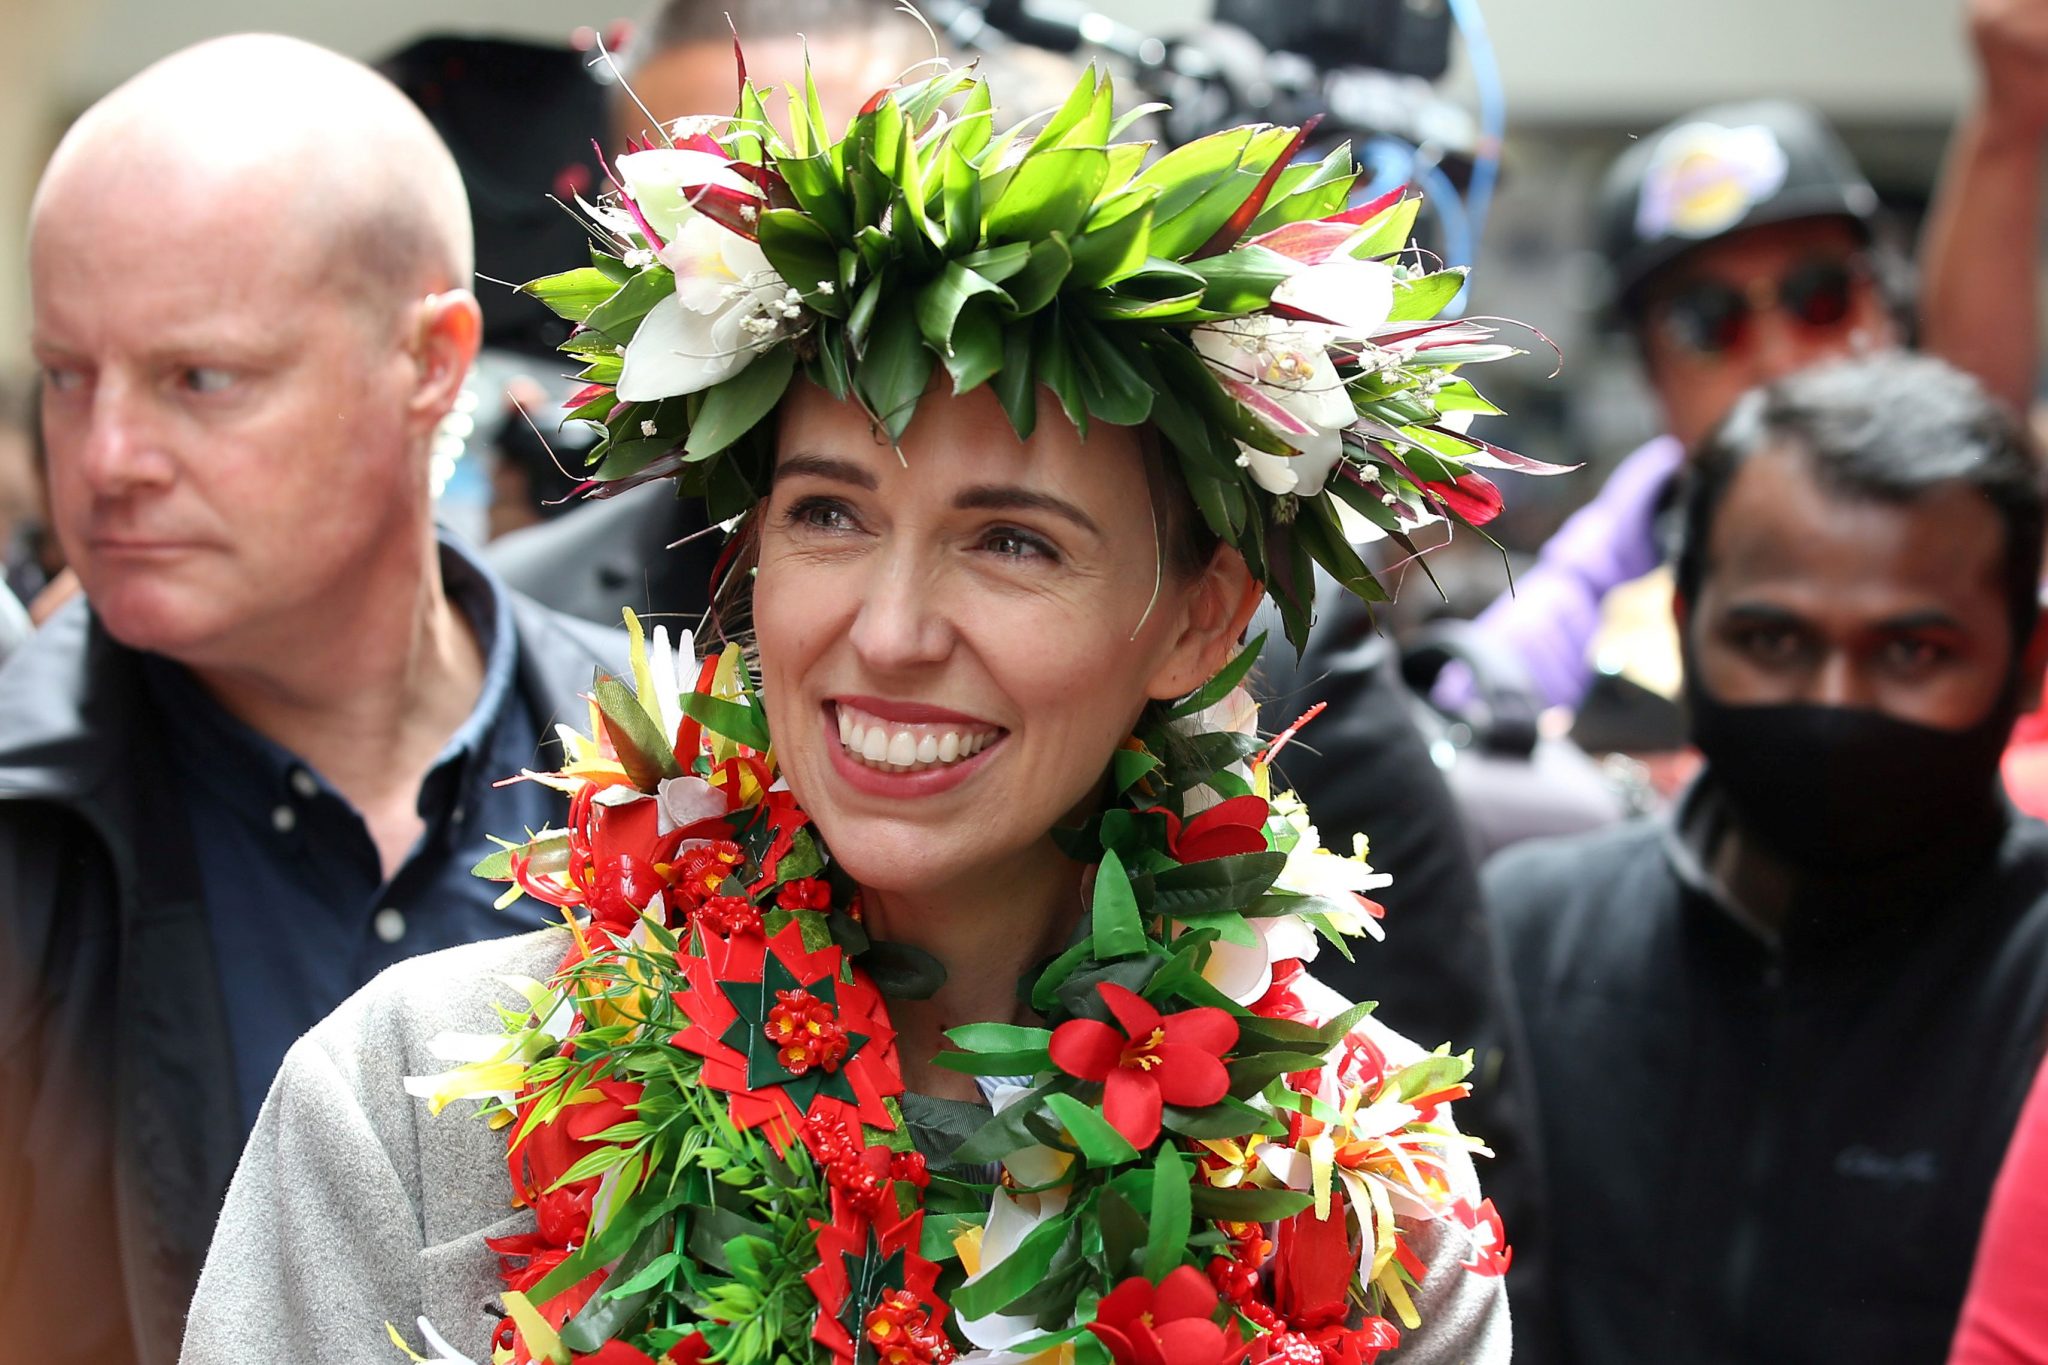 Returning to normalcy in Ardern’s New Zealand